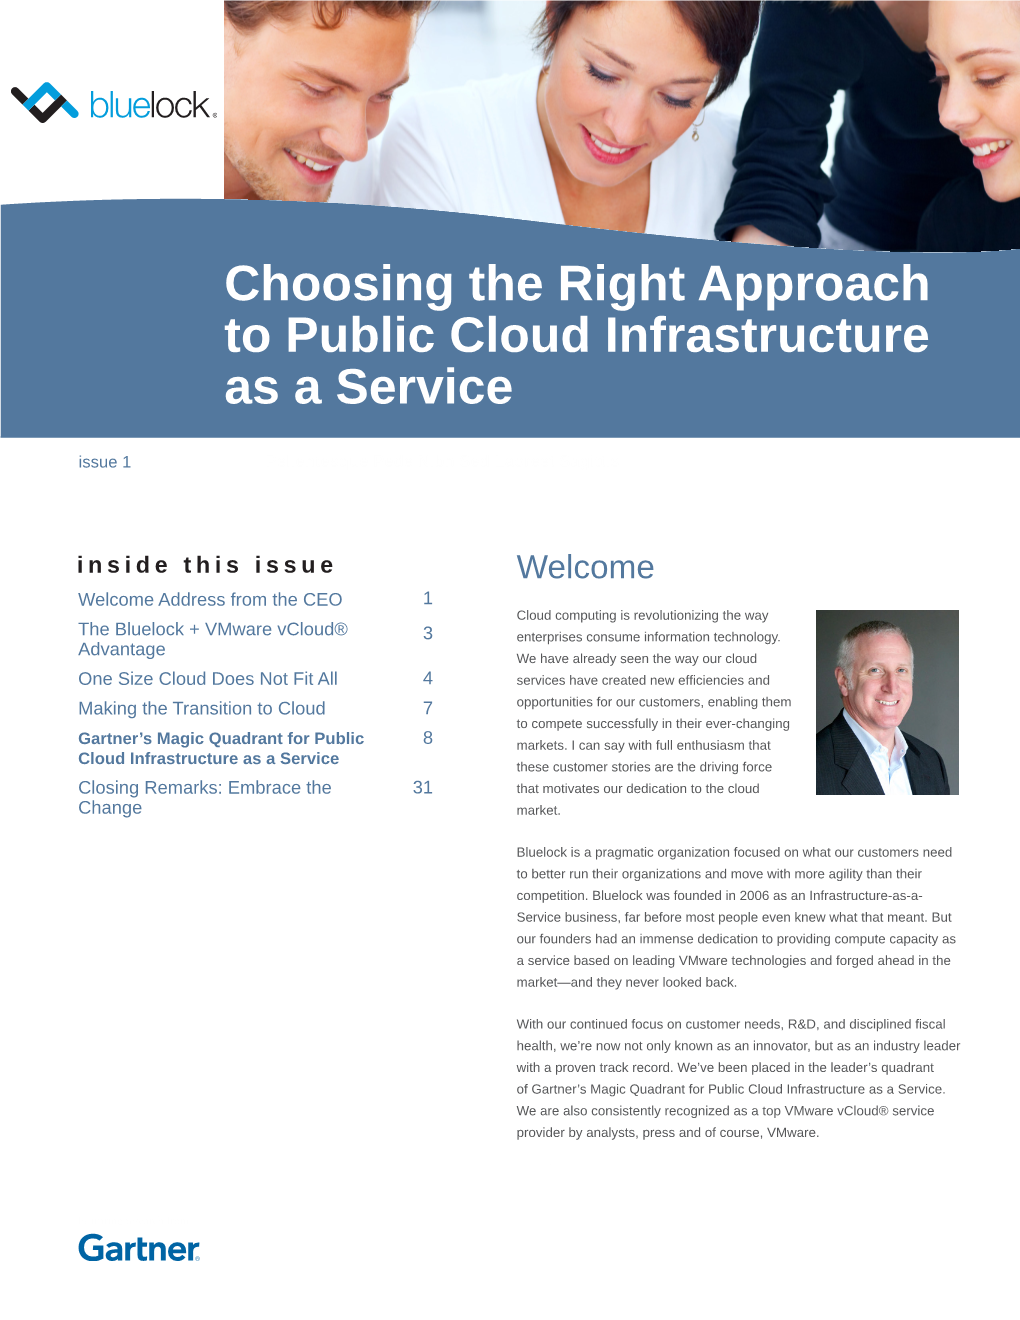 Choosing the Right Approach to Public Cloud Infrastructure As A